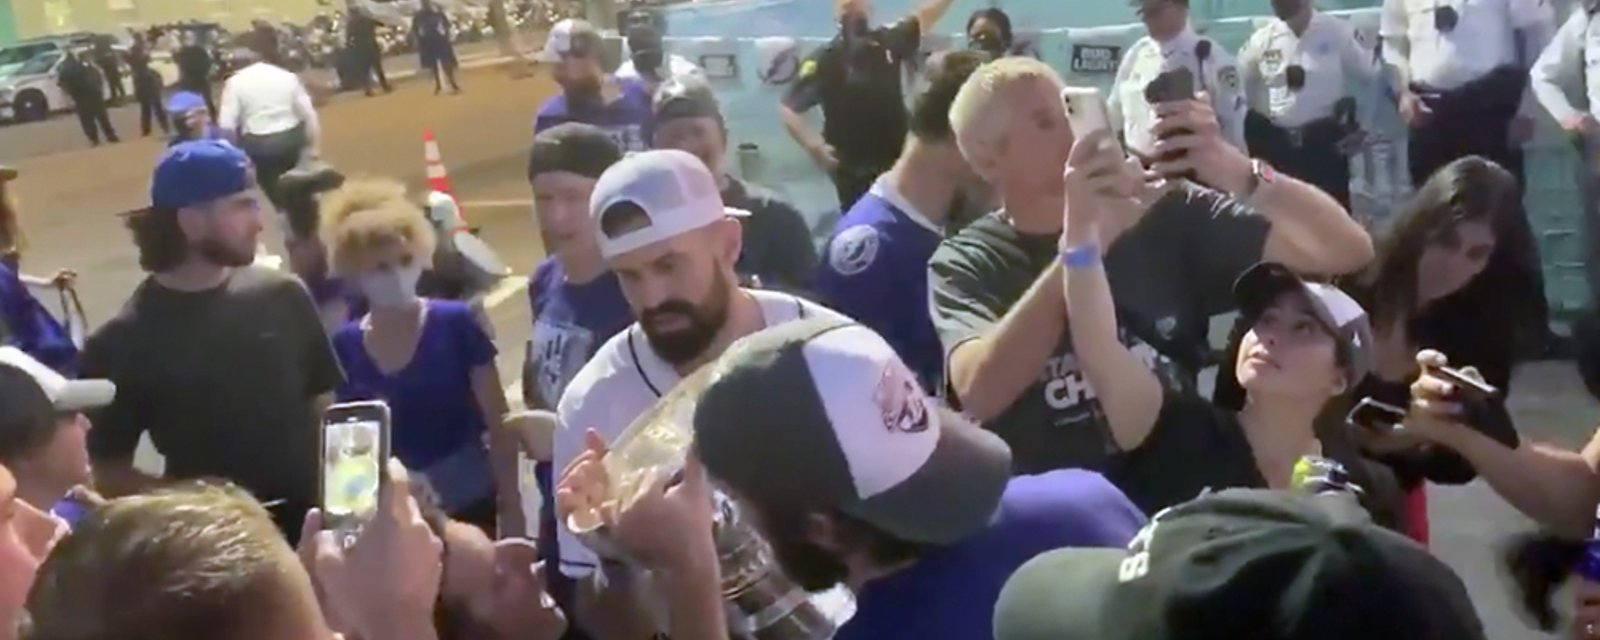 Lightning throw social distancing out the window in Stanley Cup celebration with fans